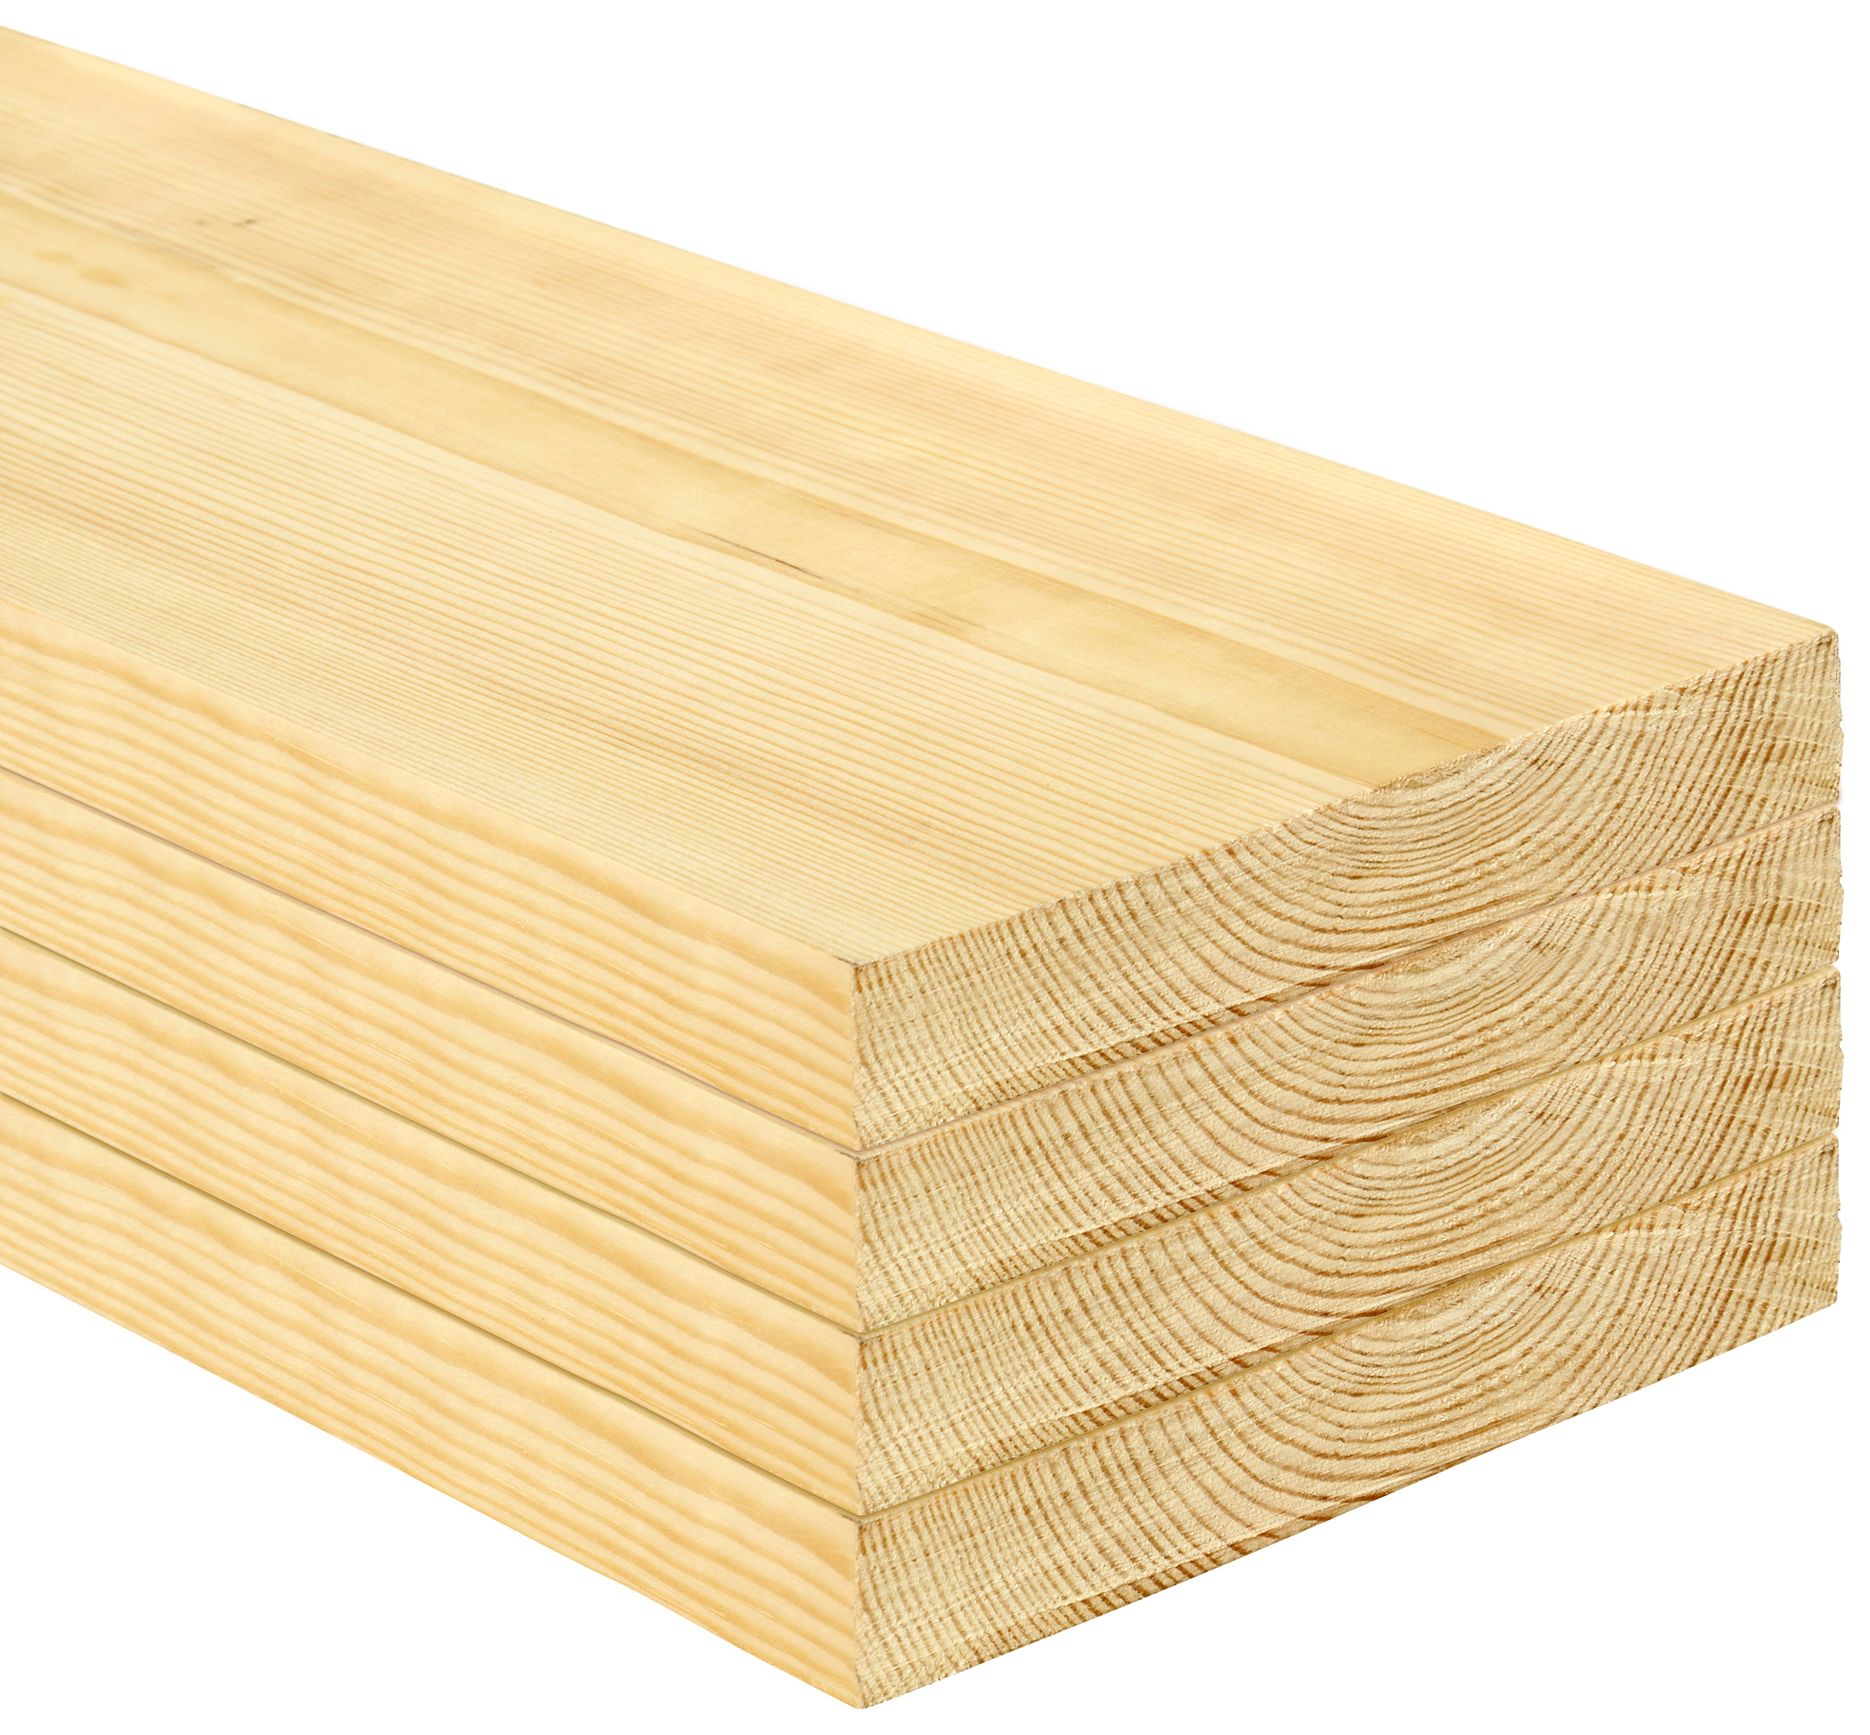 Image of Wickes Redwood PSE Timber - 20.5 x 144 x 1800mm - Pack of 4